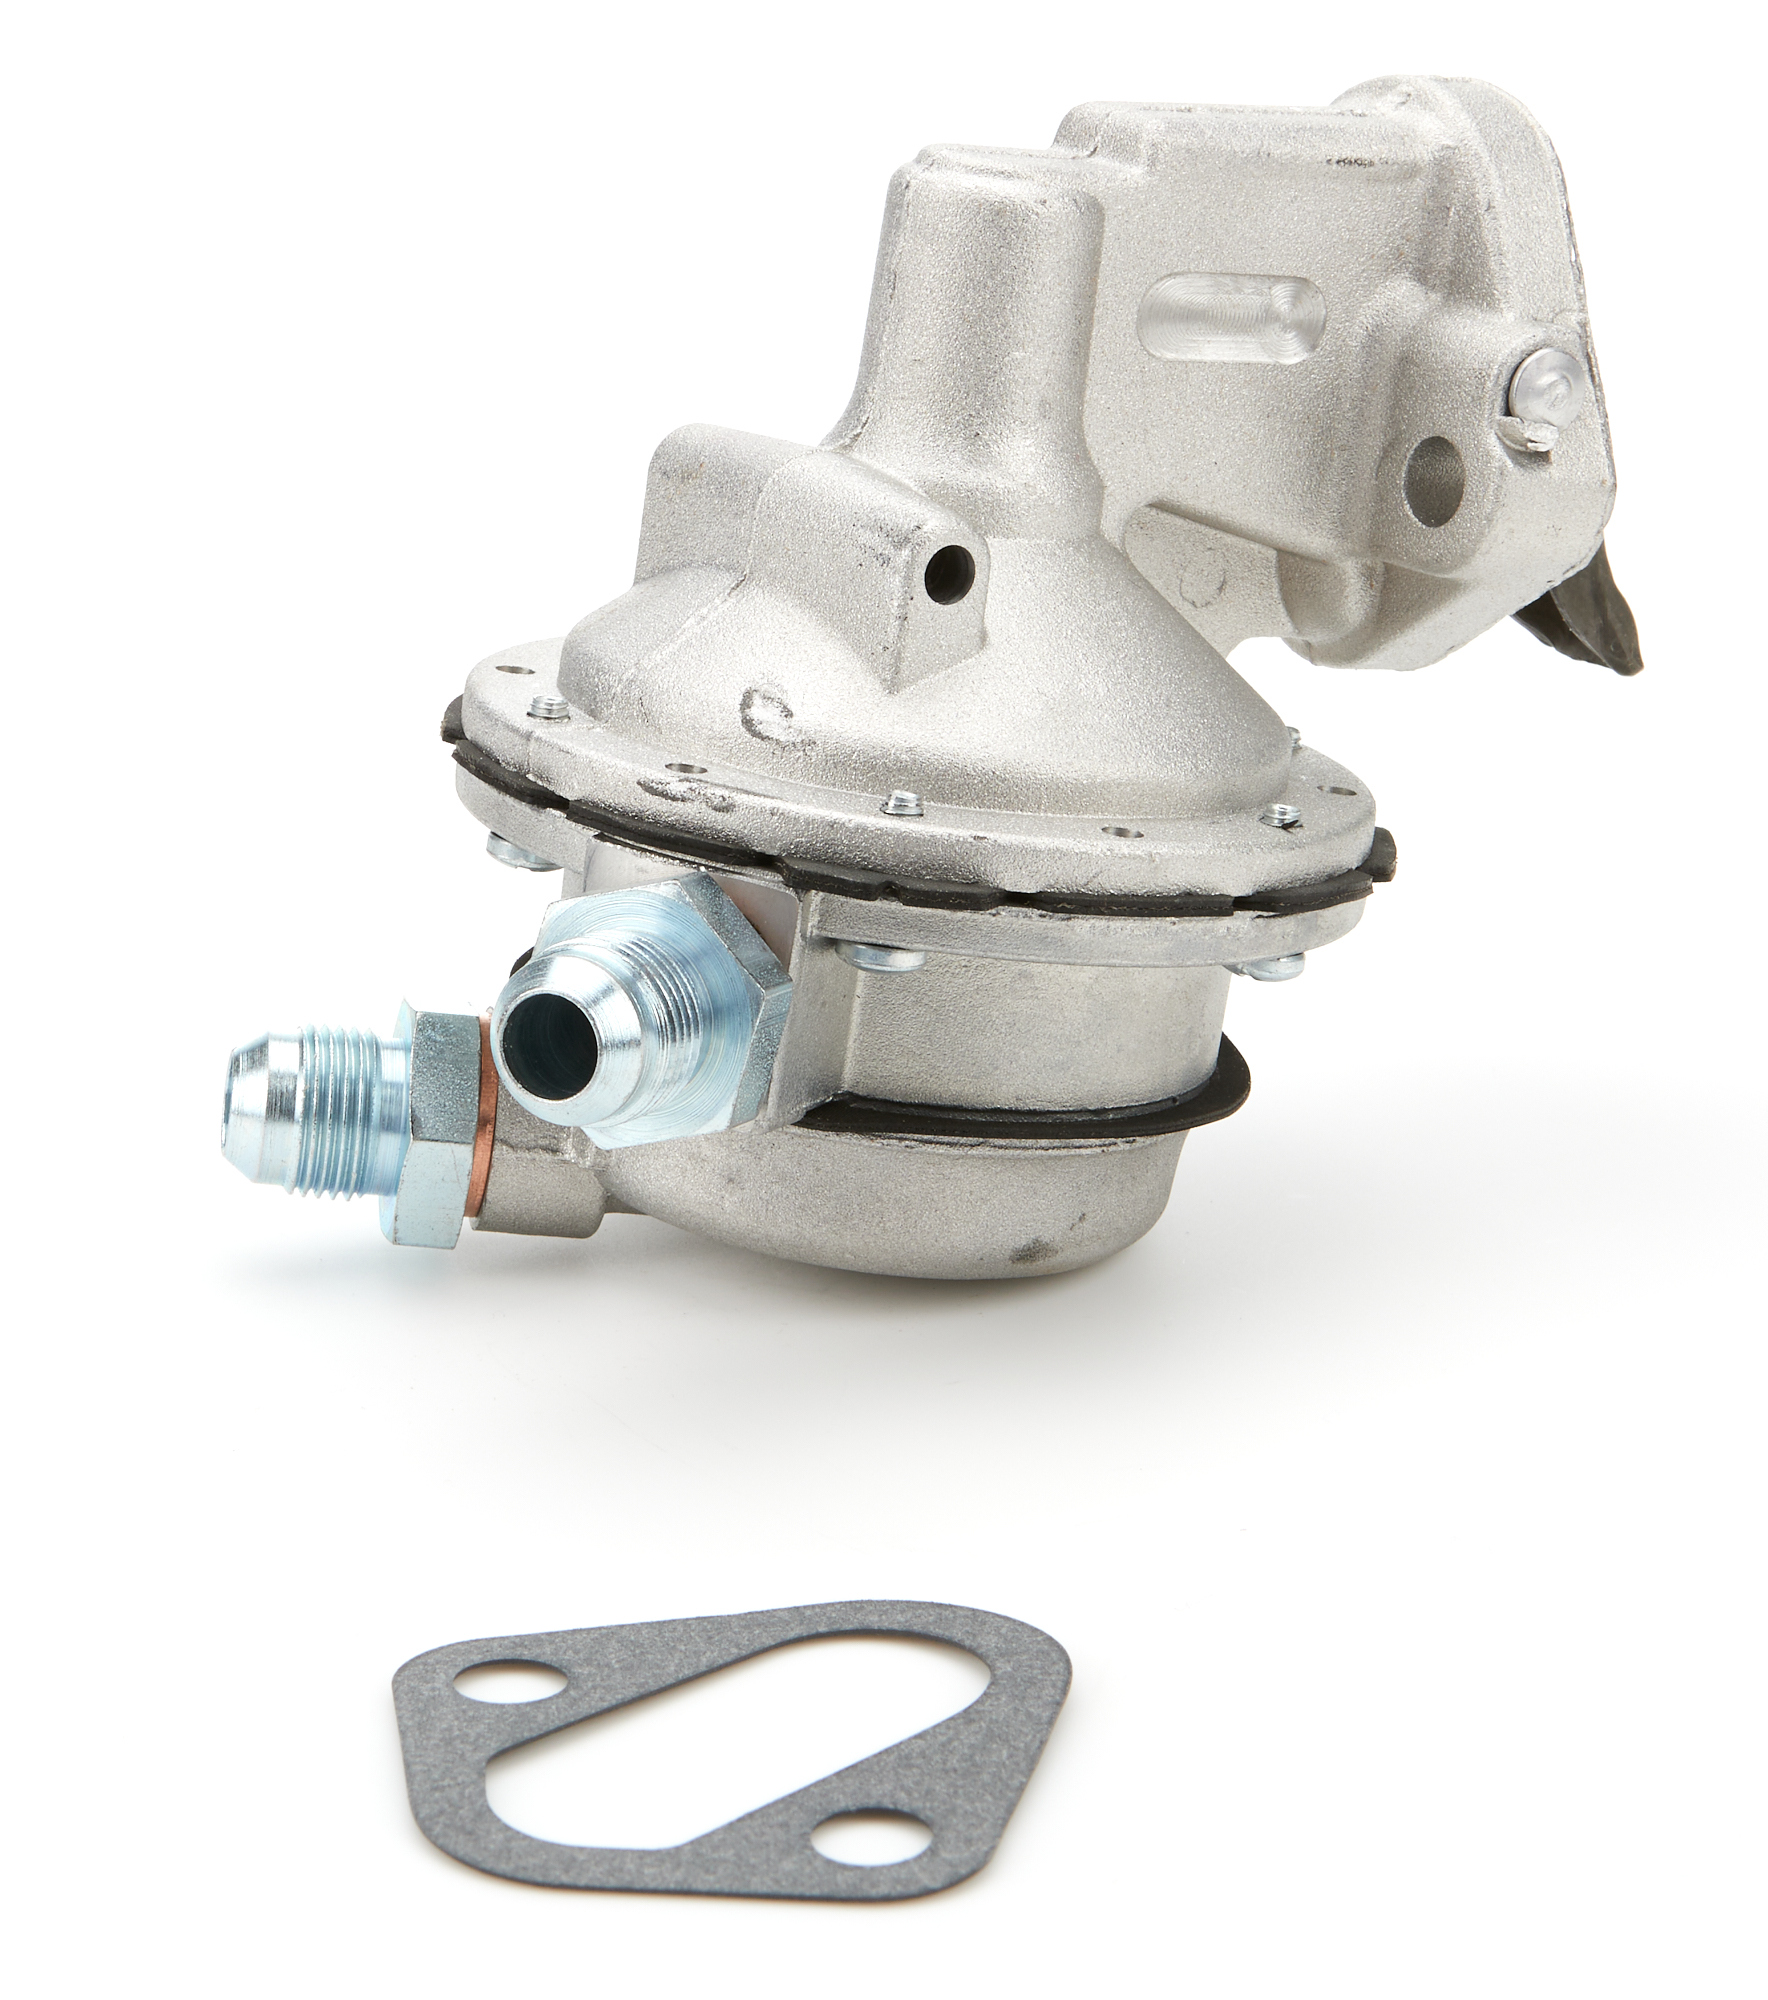 Fuel Pump - Mechanical - 172 gph - 7.0-8.5 psi - 8 AN Male Inlet - 8 AN Male Outlet - Aluminum - Natural - Gas - Small Block Chevy - Each